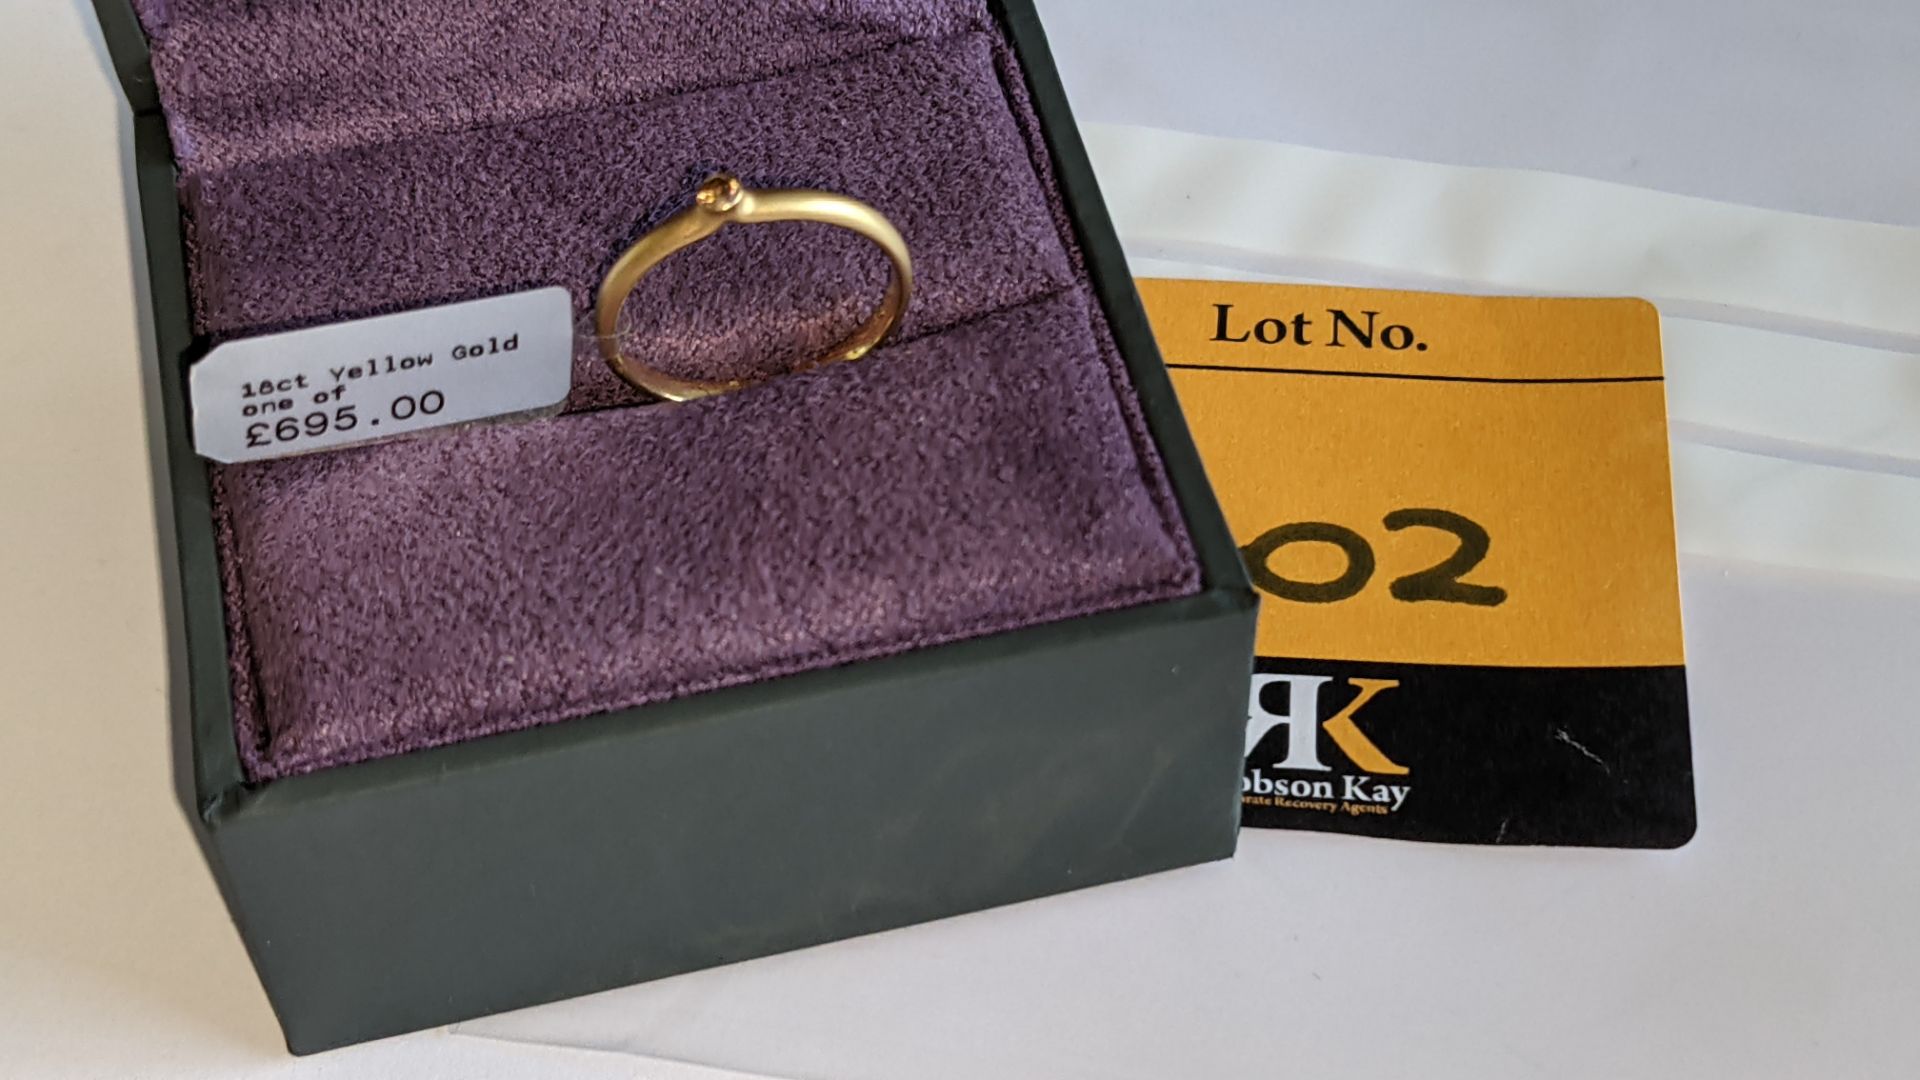 18ct yellow gold & champagne diamond ring RRP £695 - Image 13 of 14